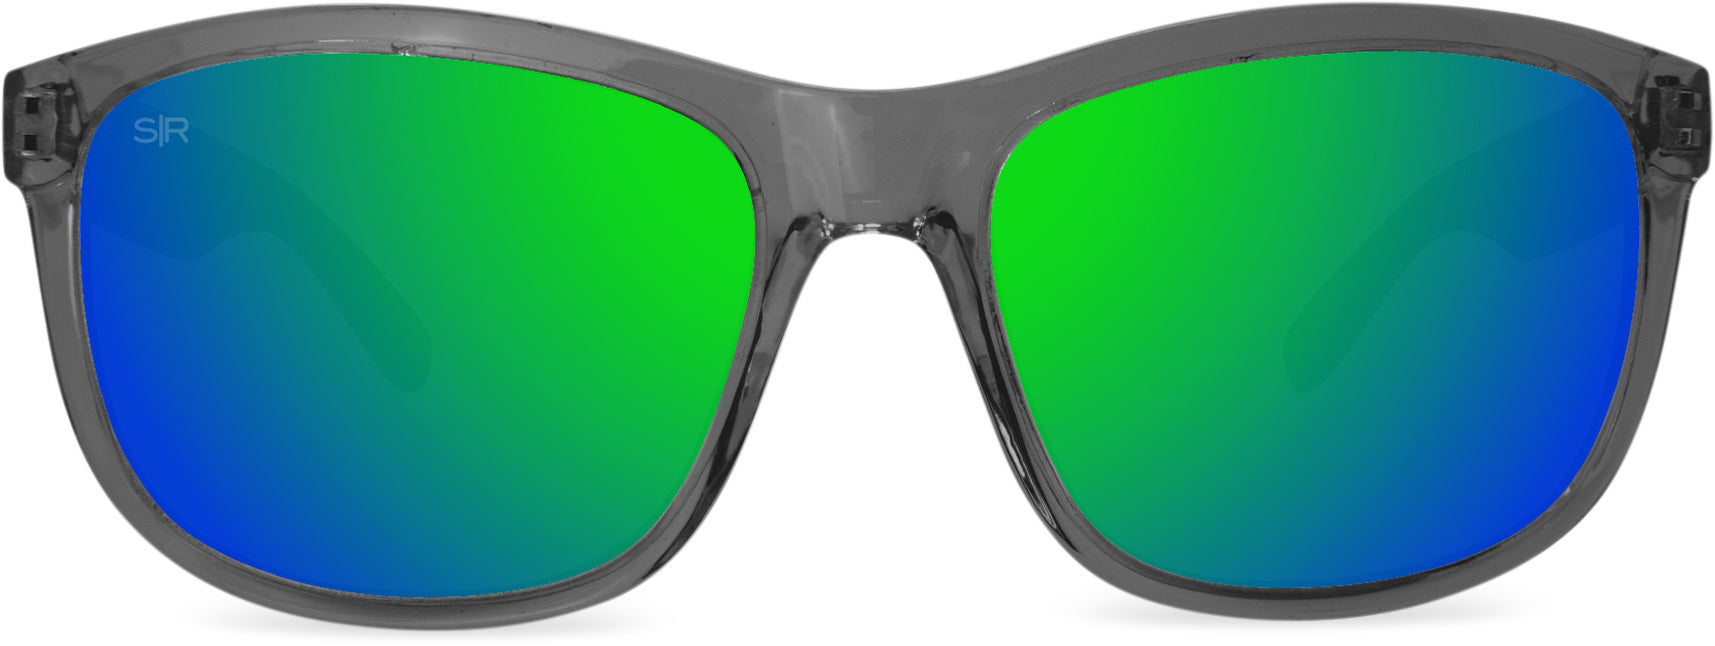 Signature Series - Emerald Smoke Original Polarized Sunglasses | Gloss Sunglasses | Best Christmas Gifts | Gifts for The Holidays | Unique Gifts for